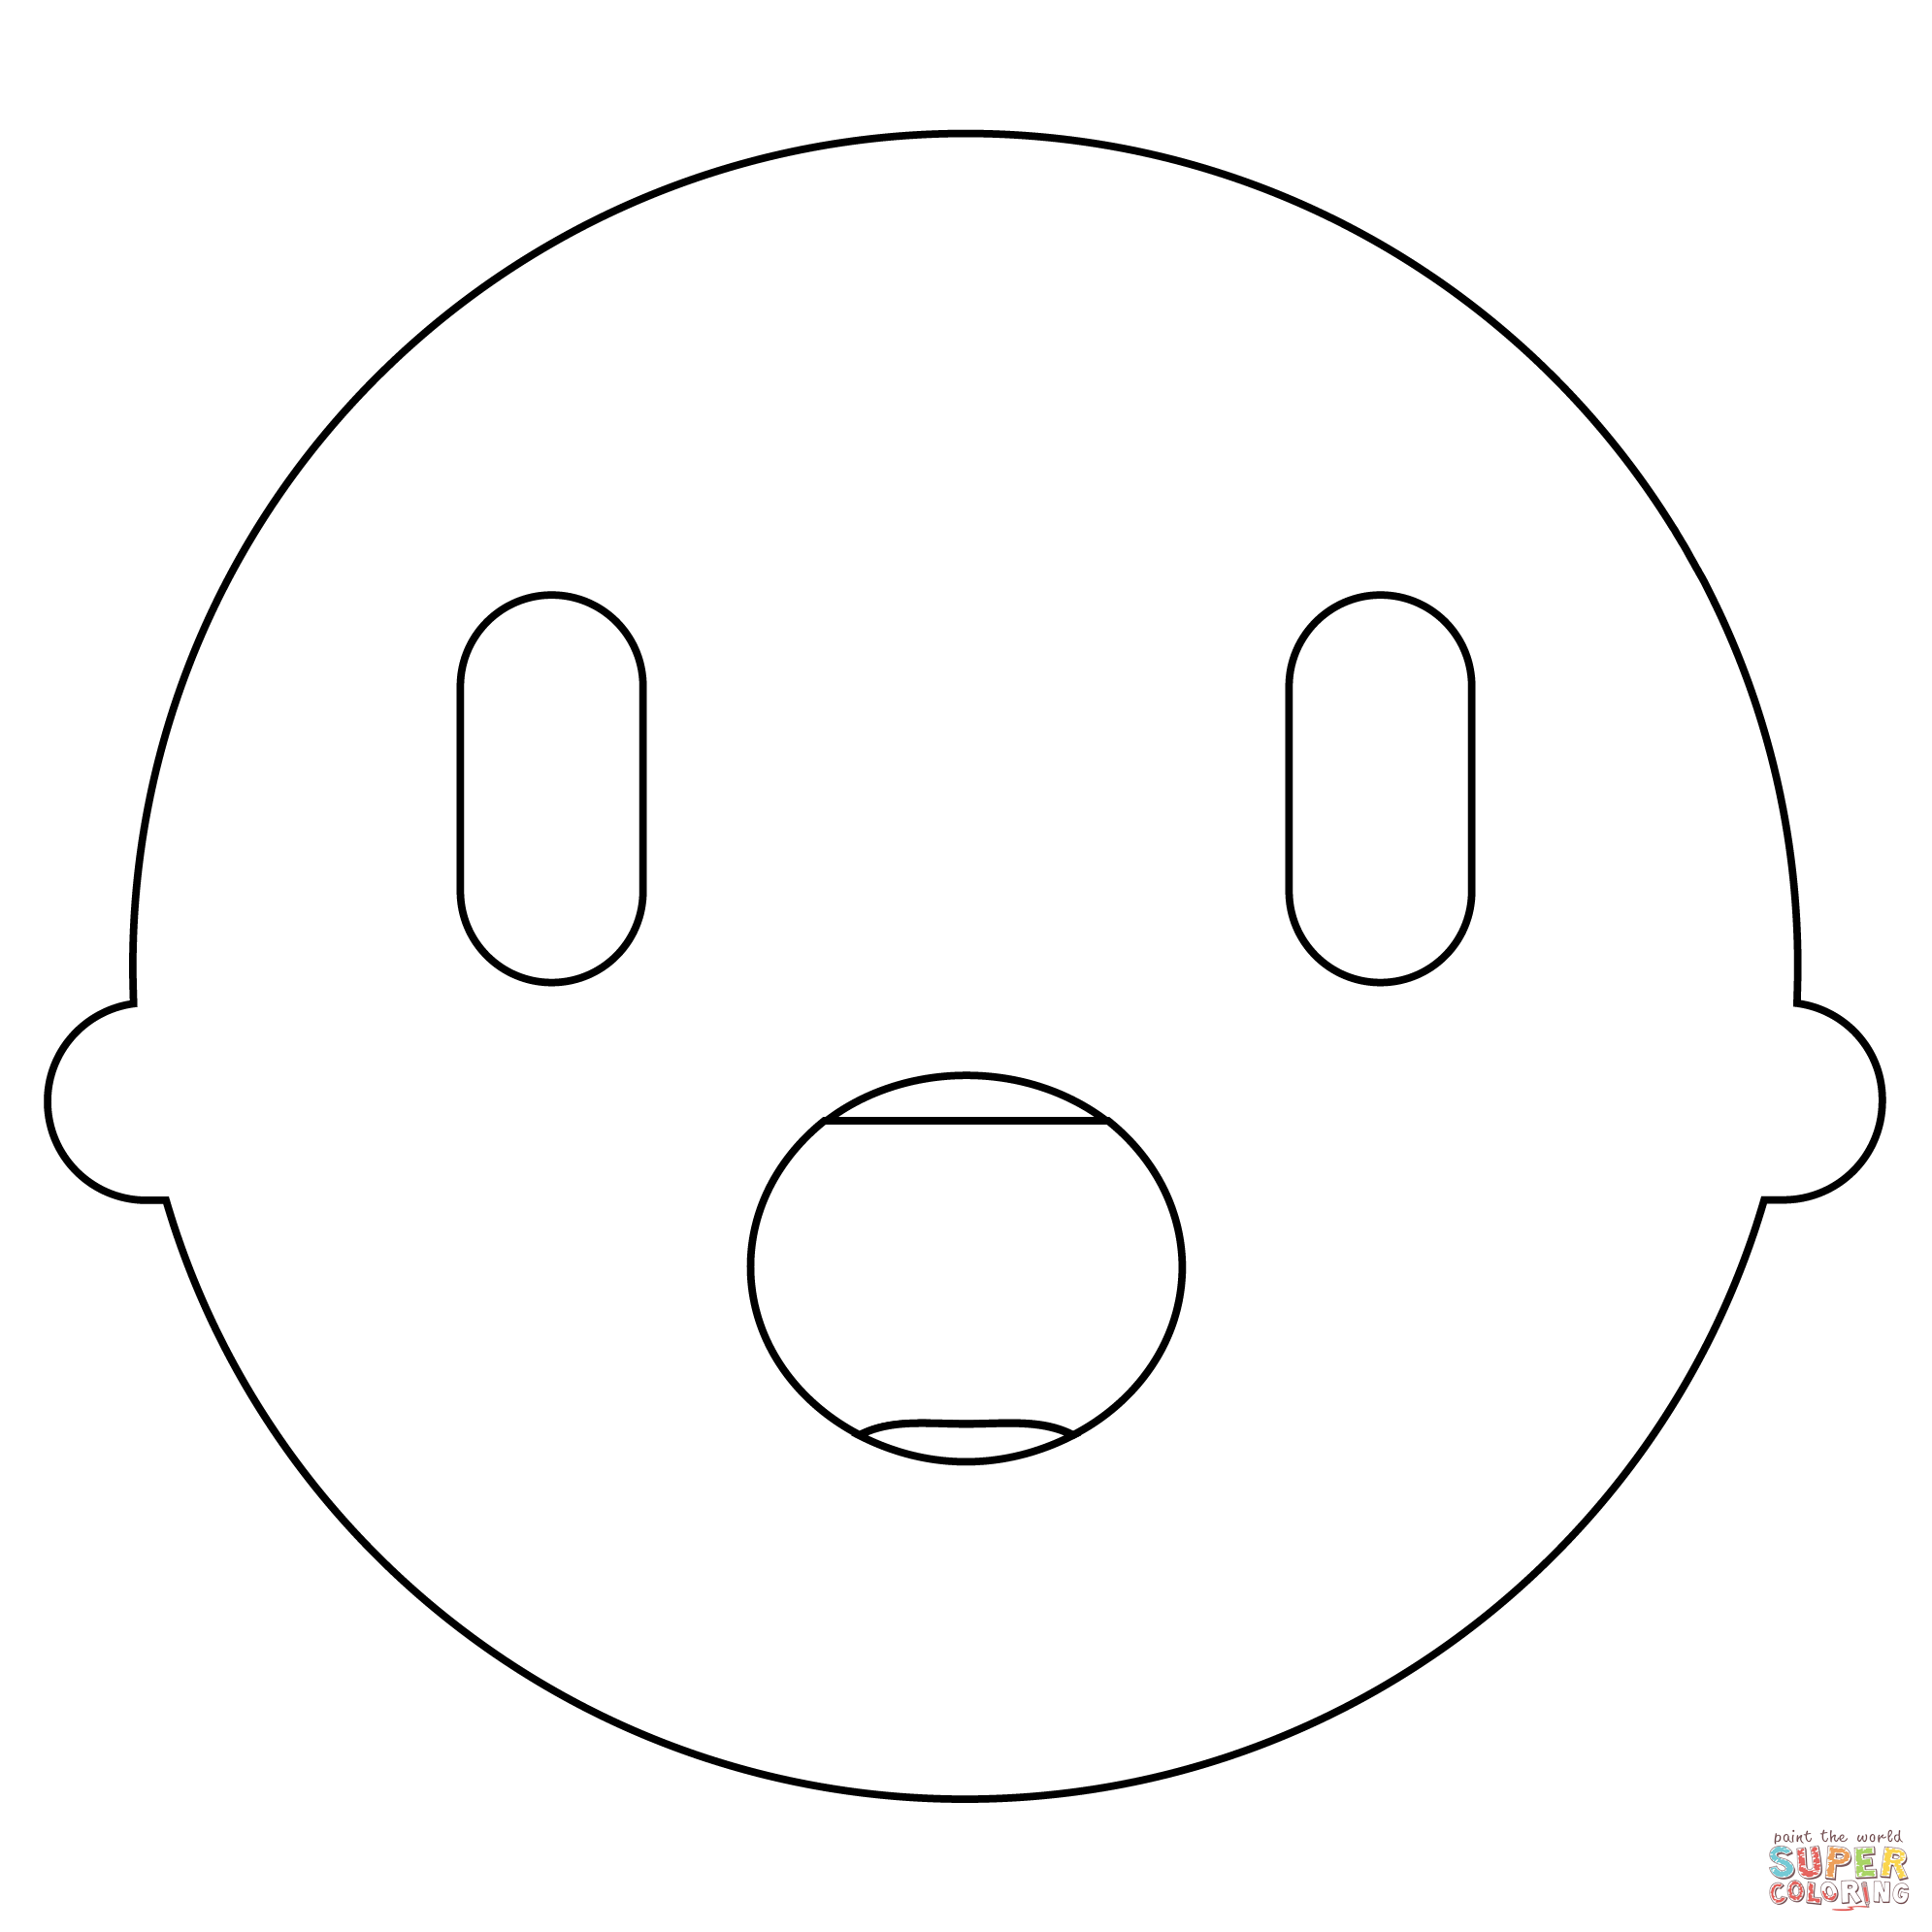 Open mouth face emoji coloring page free printable coloring pages